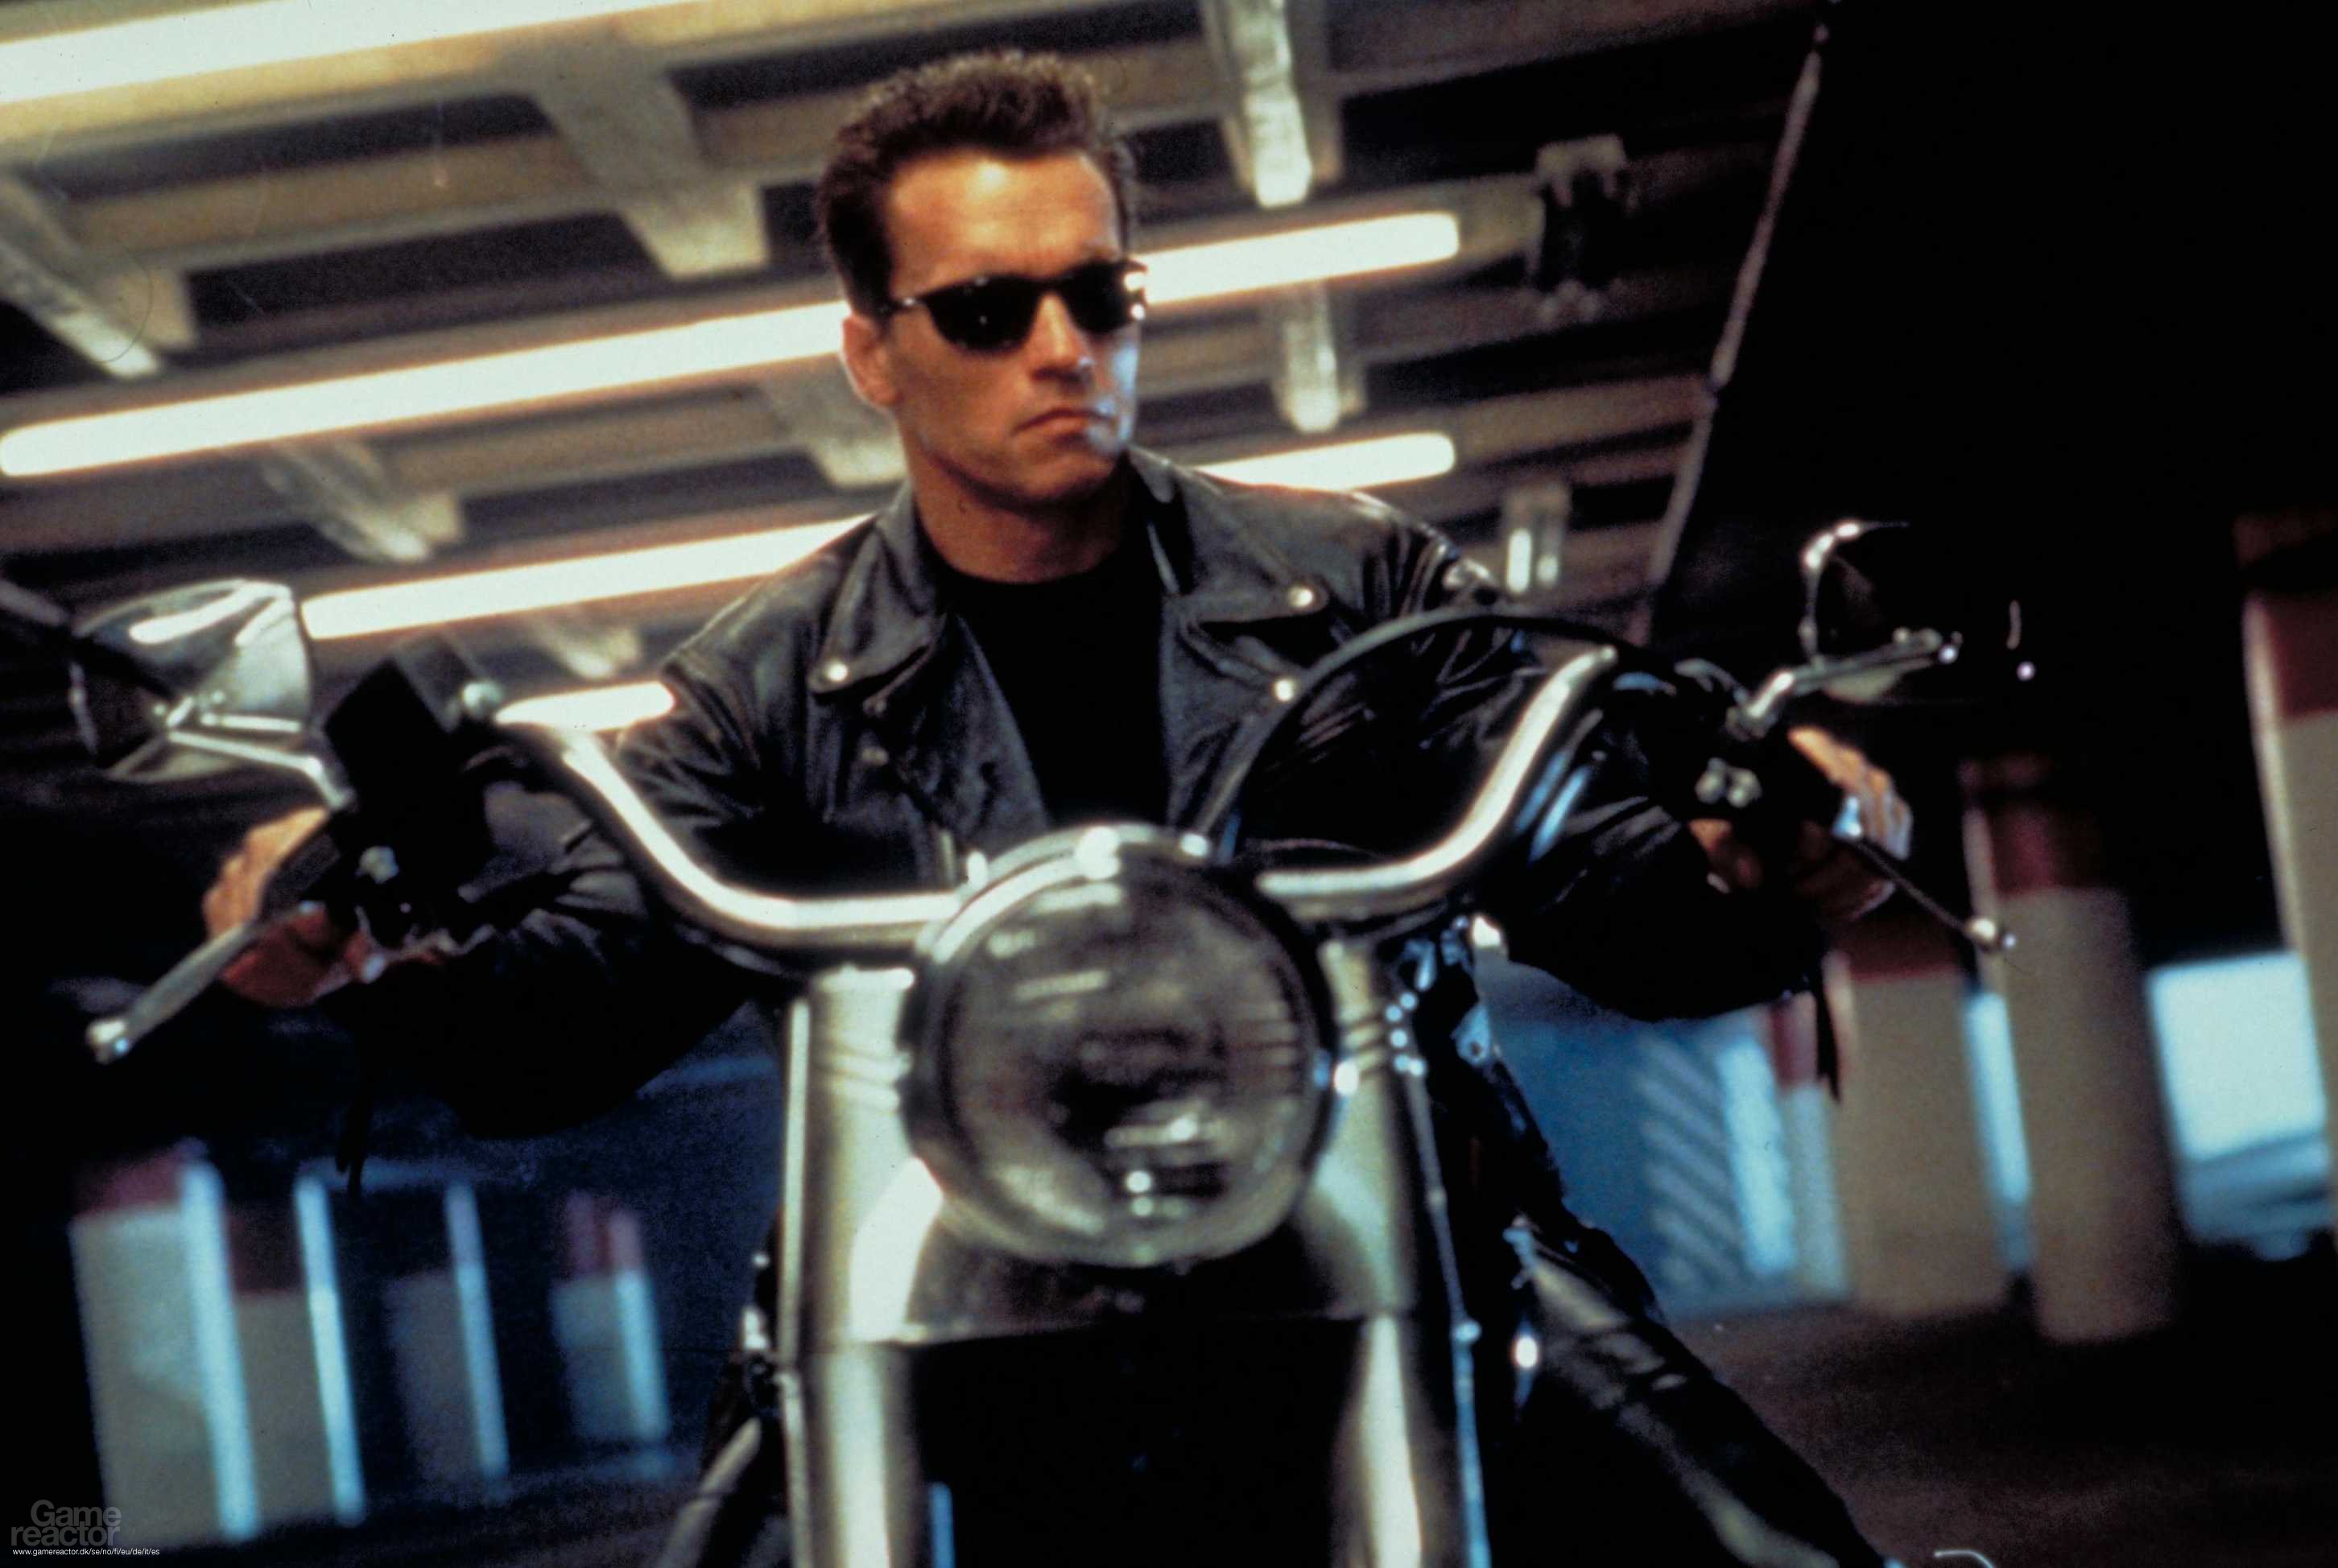 Why a crucial scene that gave Terminator context was removed